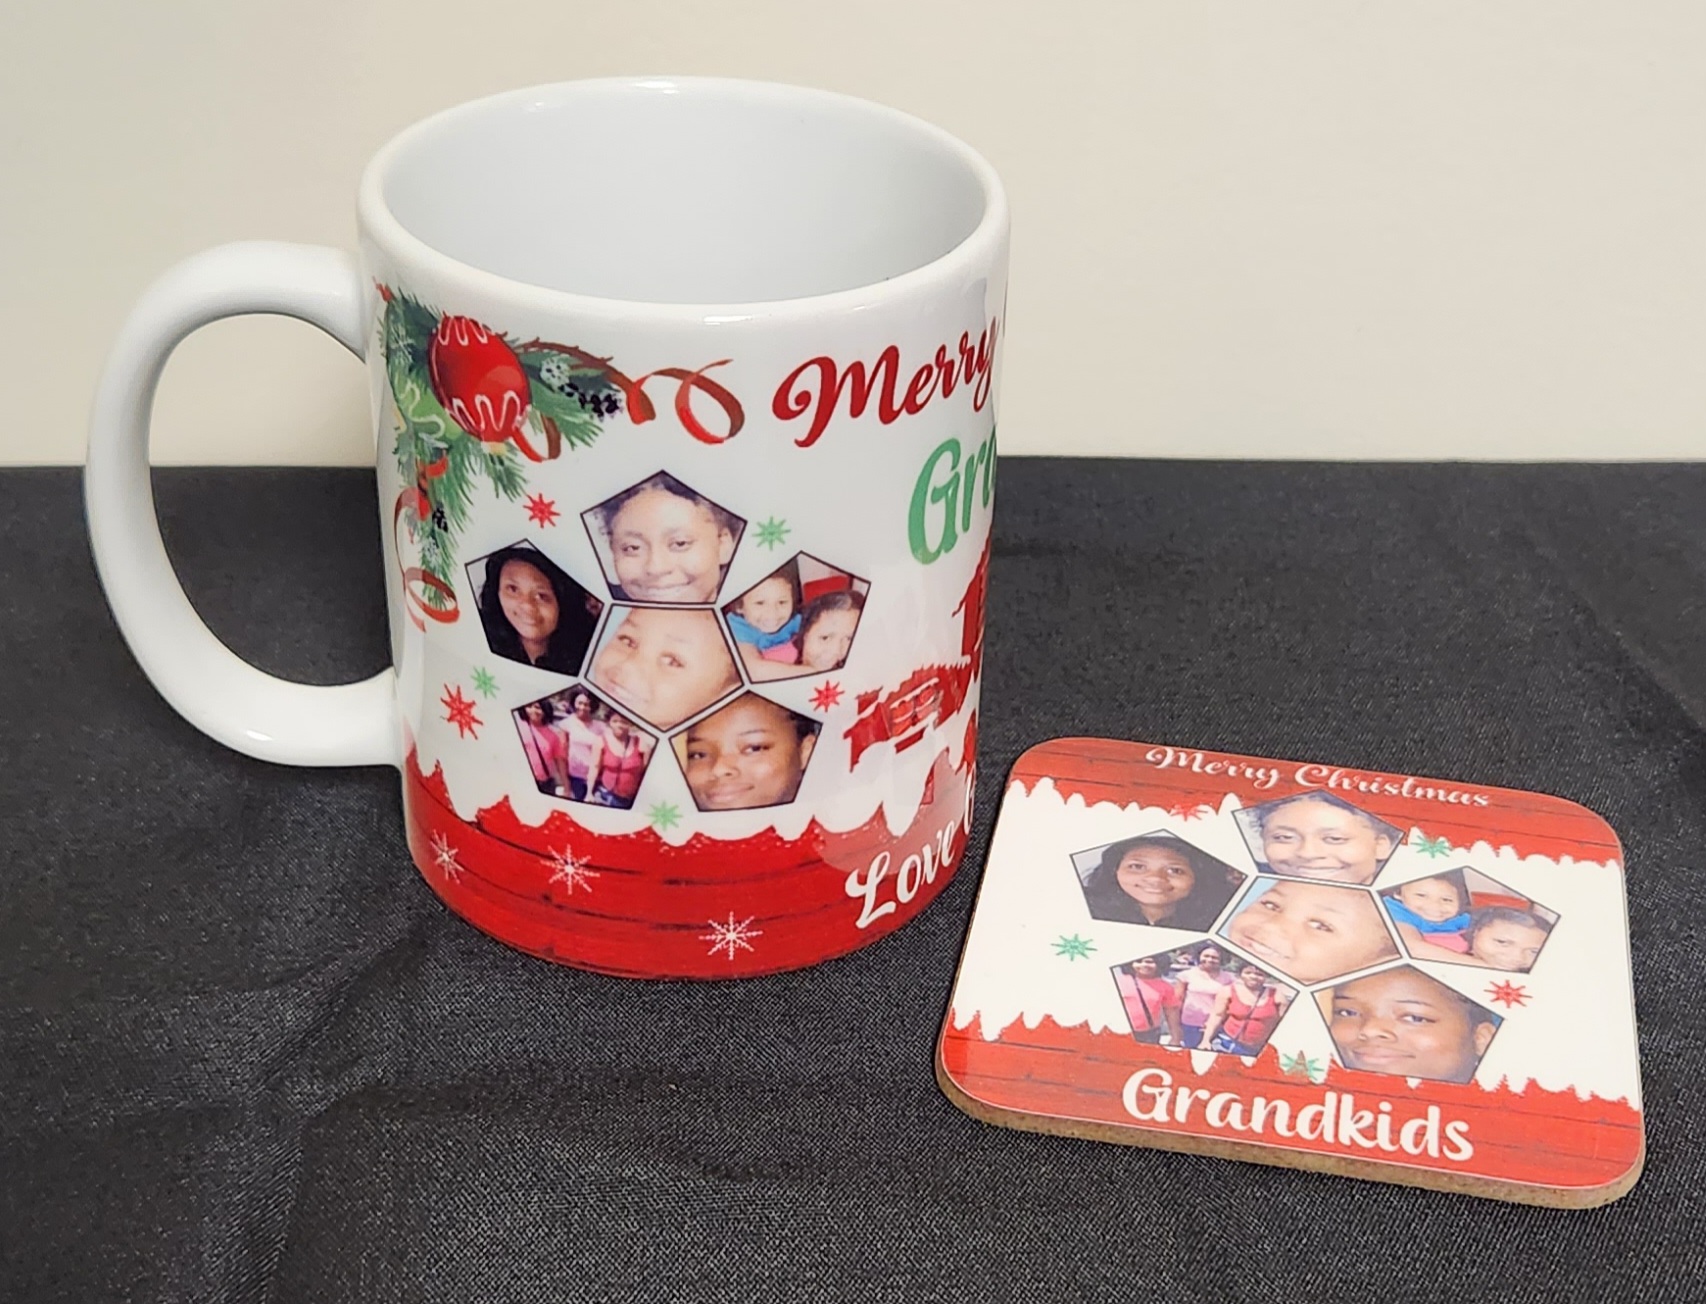 Personalized Christmas mug and matching coaster made with sublimation printing